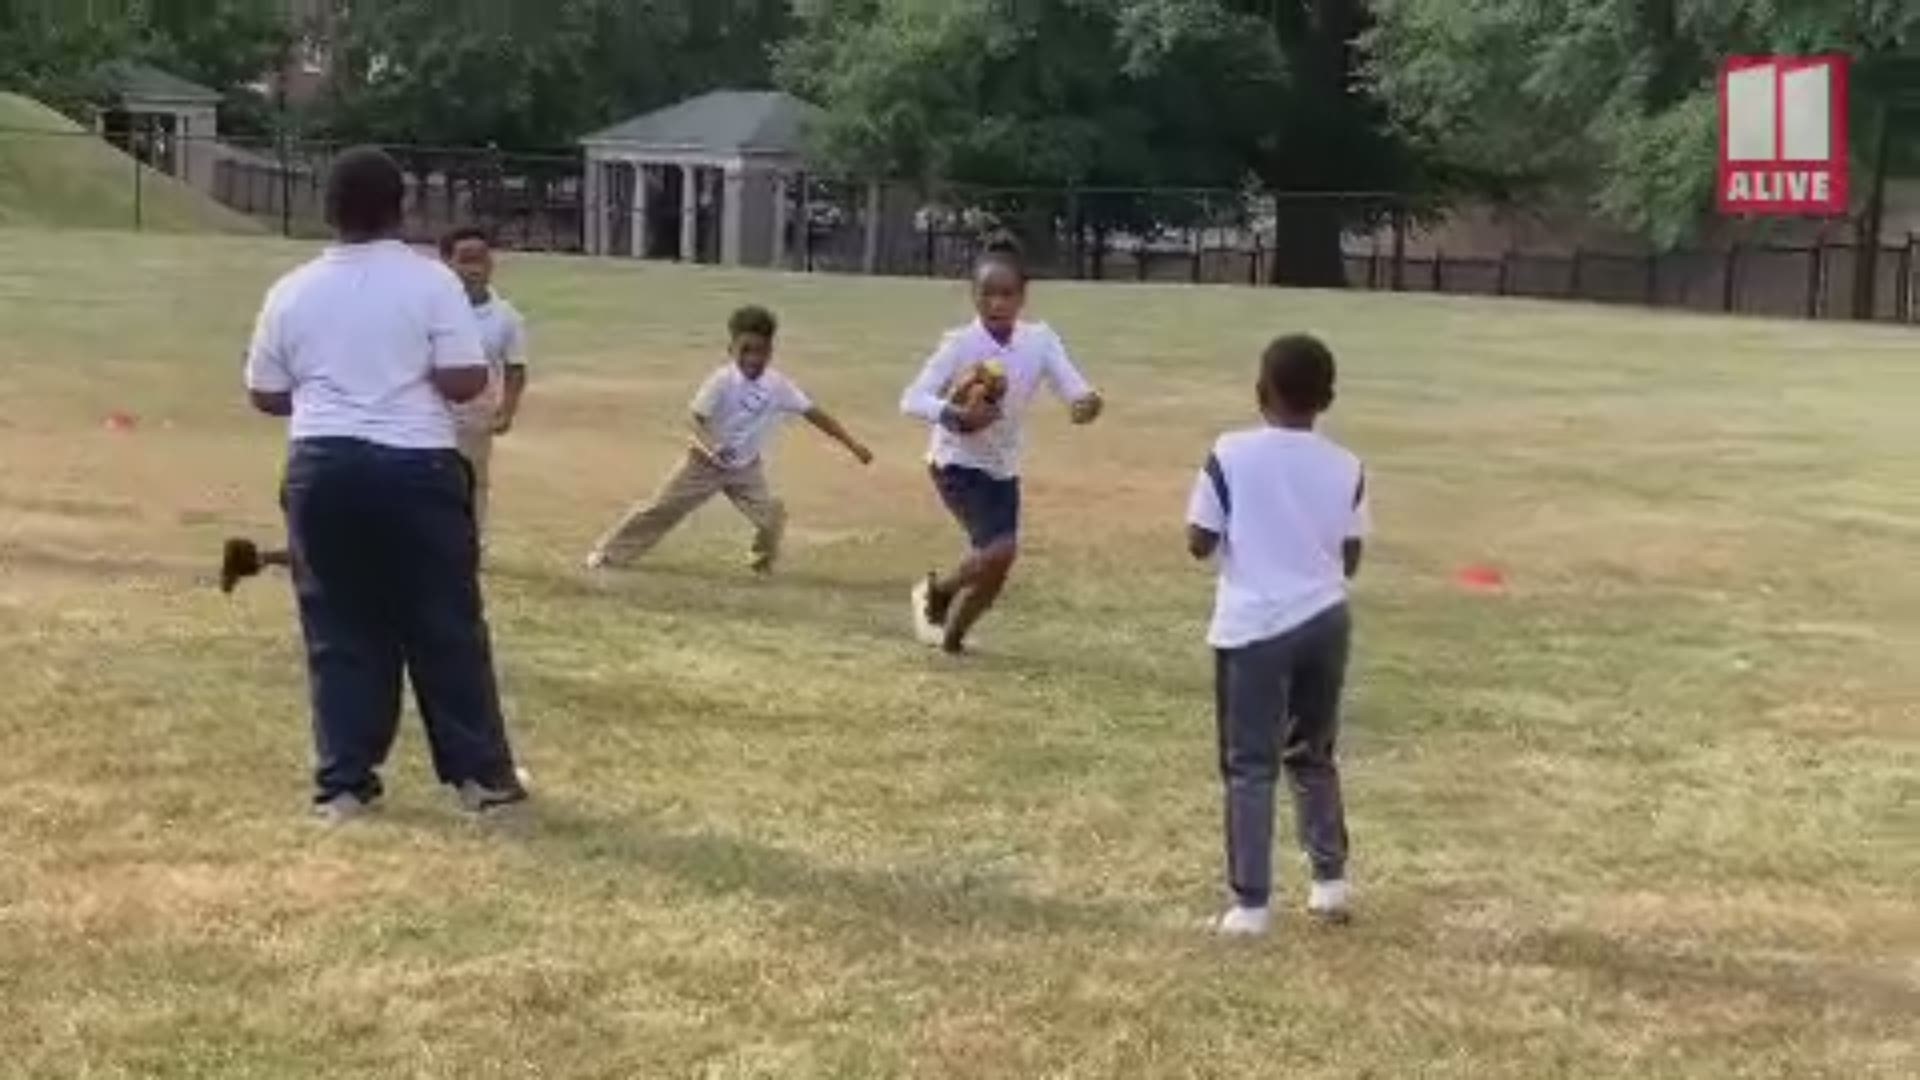 Atlanta Youth Rugby is trying to grow the sport among kids in neighborhoods around the city.